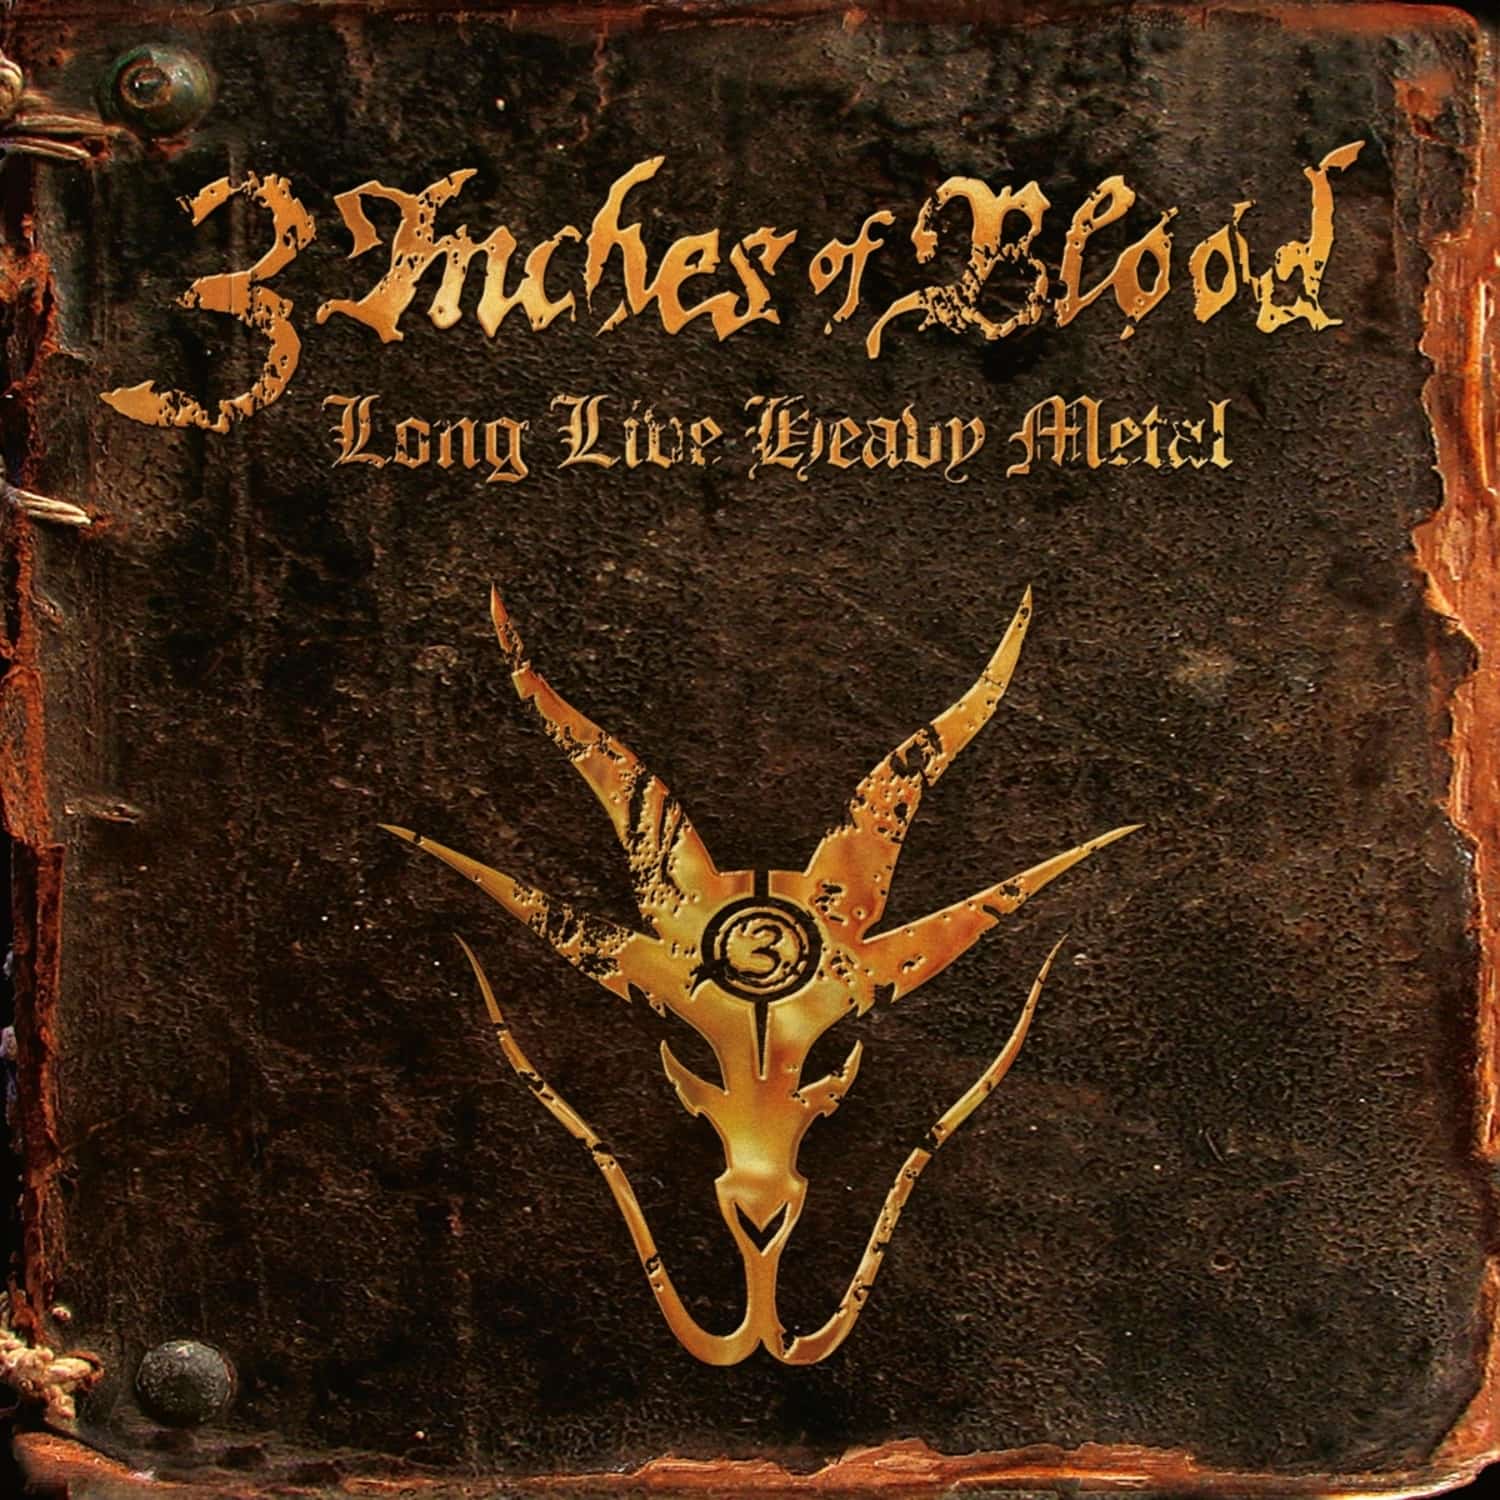 3 Inches Of Blood - LONG LIVE HEAVY METAL 